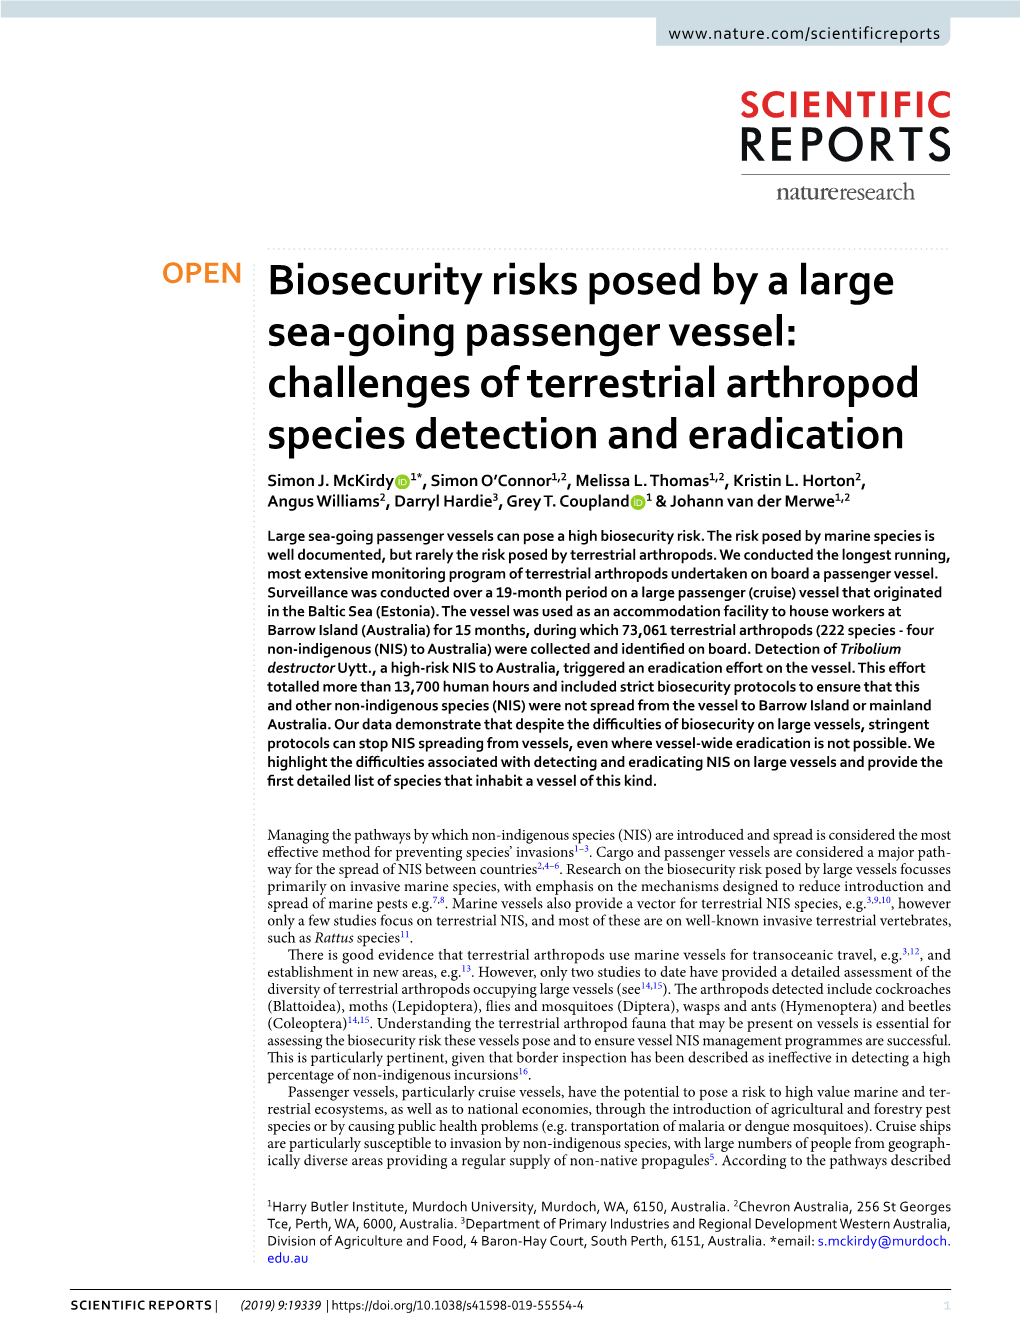 Biosecurity Risks Posed by a Large Sea-Going Passenger Vessel: Challenges of Terrestrial Arthropod Species Detection and Eradication Simon J